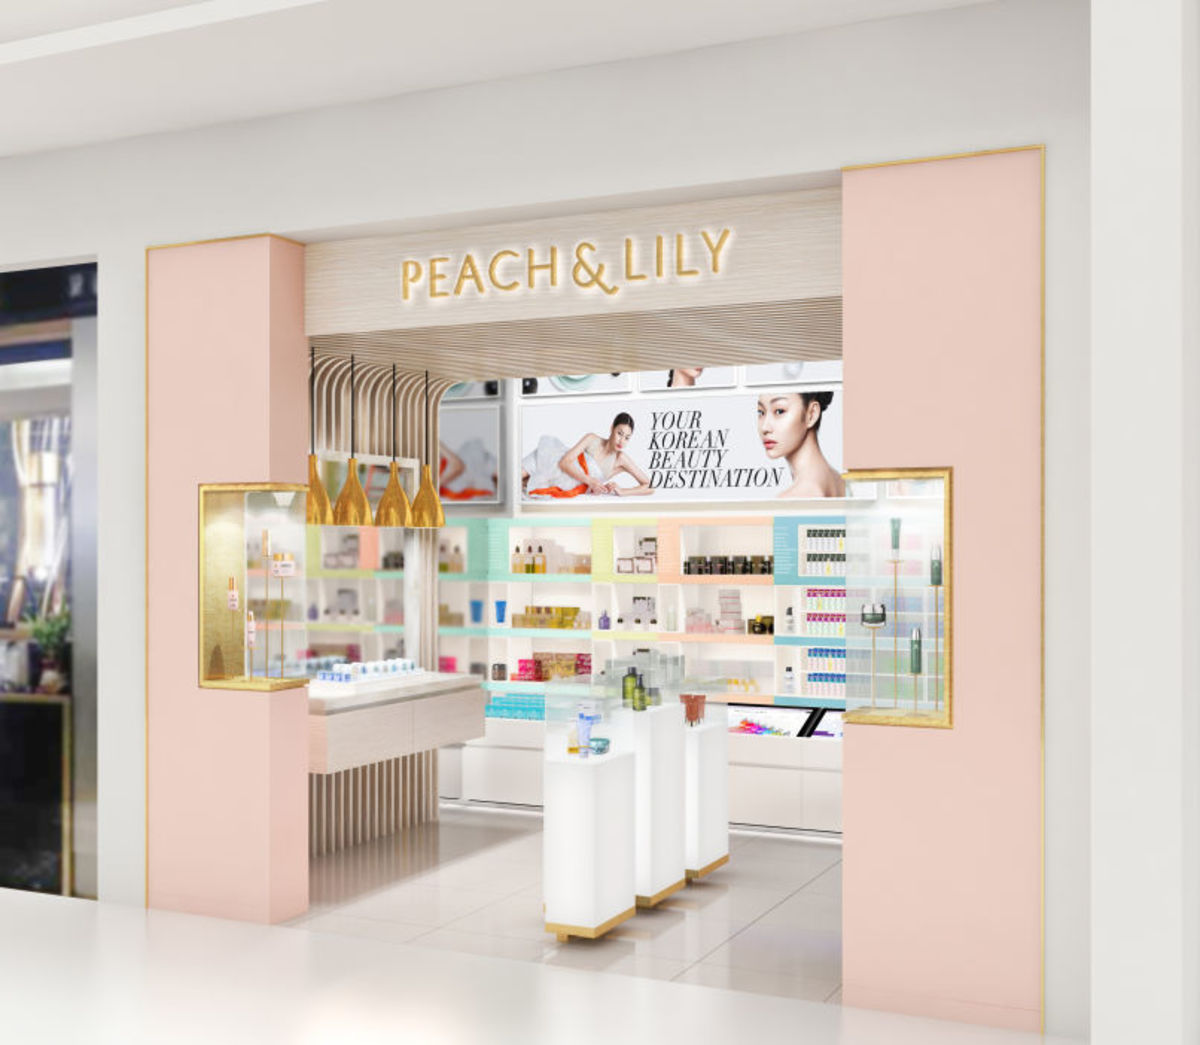 Peach & Lily's K-beauty shop-in-shop in Macy's. Photo: Peach & Lily